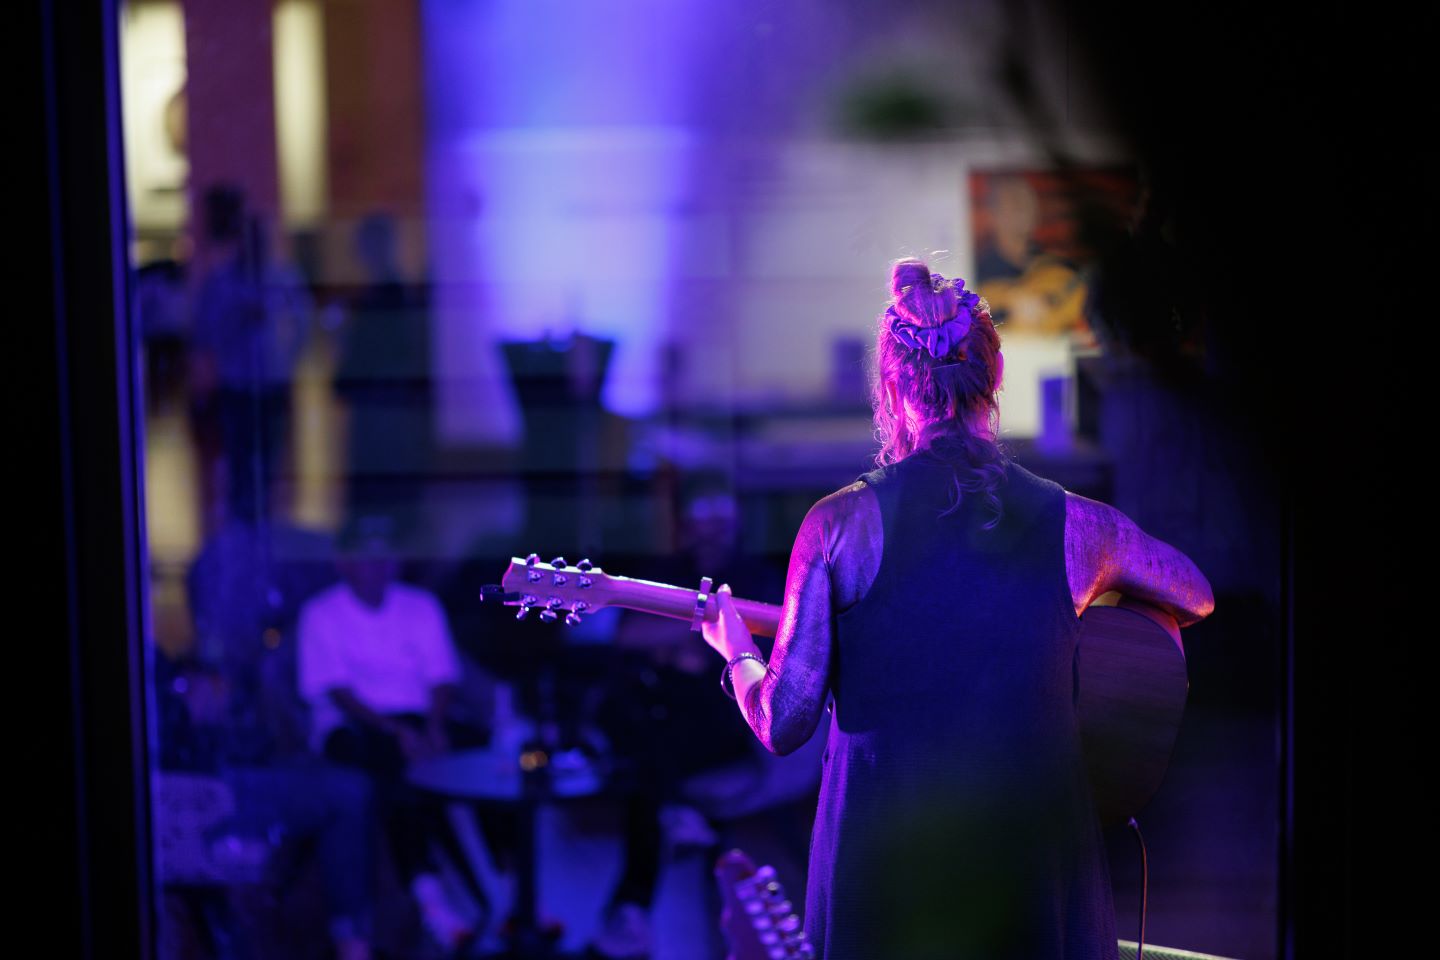 Looking from behind a musician on stage who is lit in purple lighting and holding a guitar, out on the crowd watching the performance